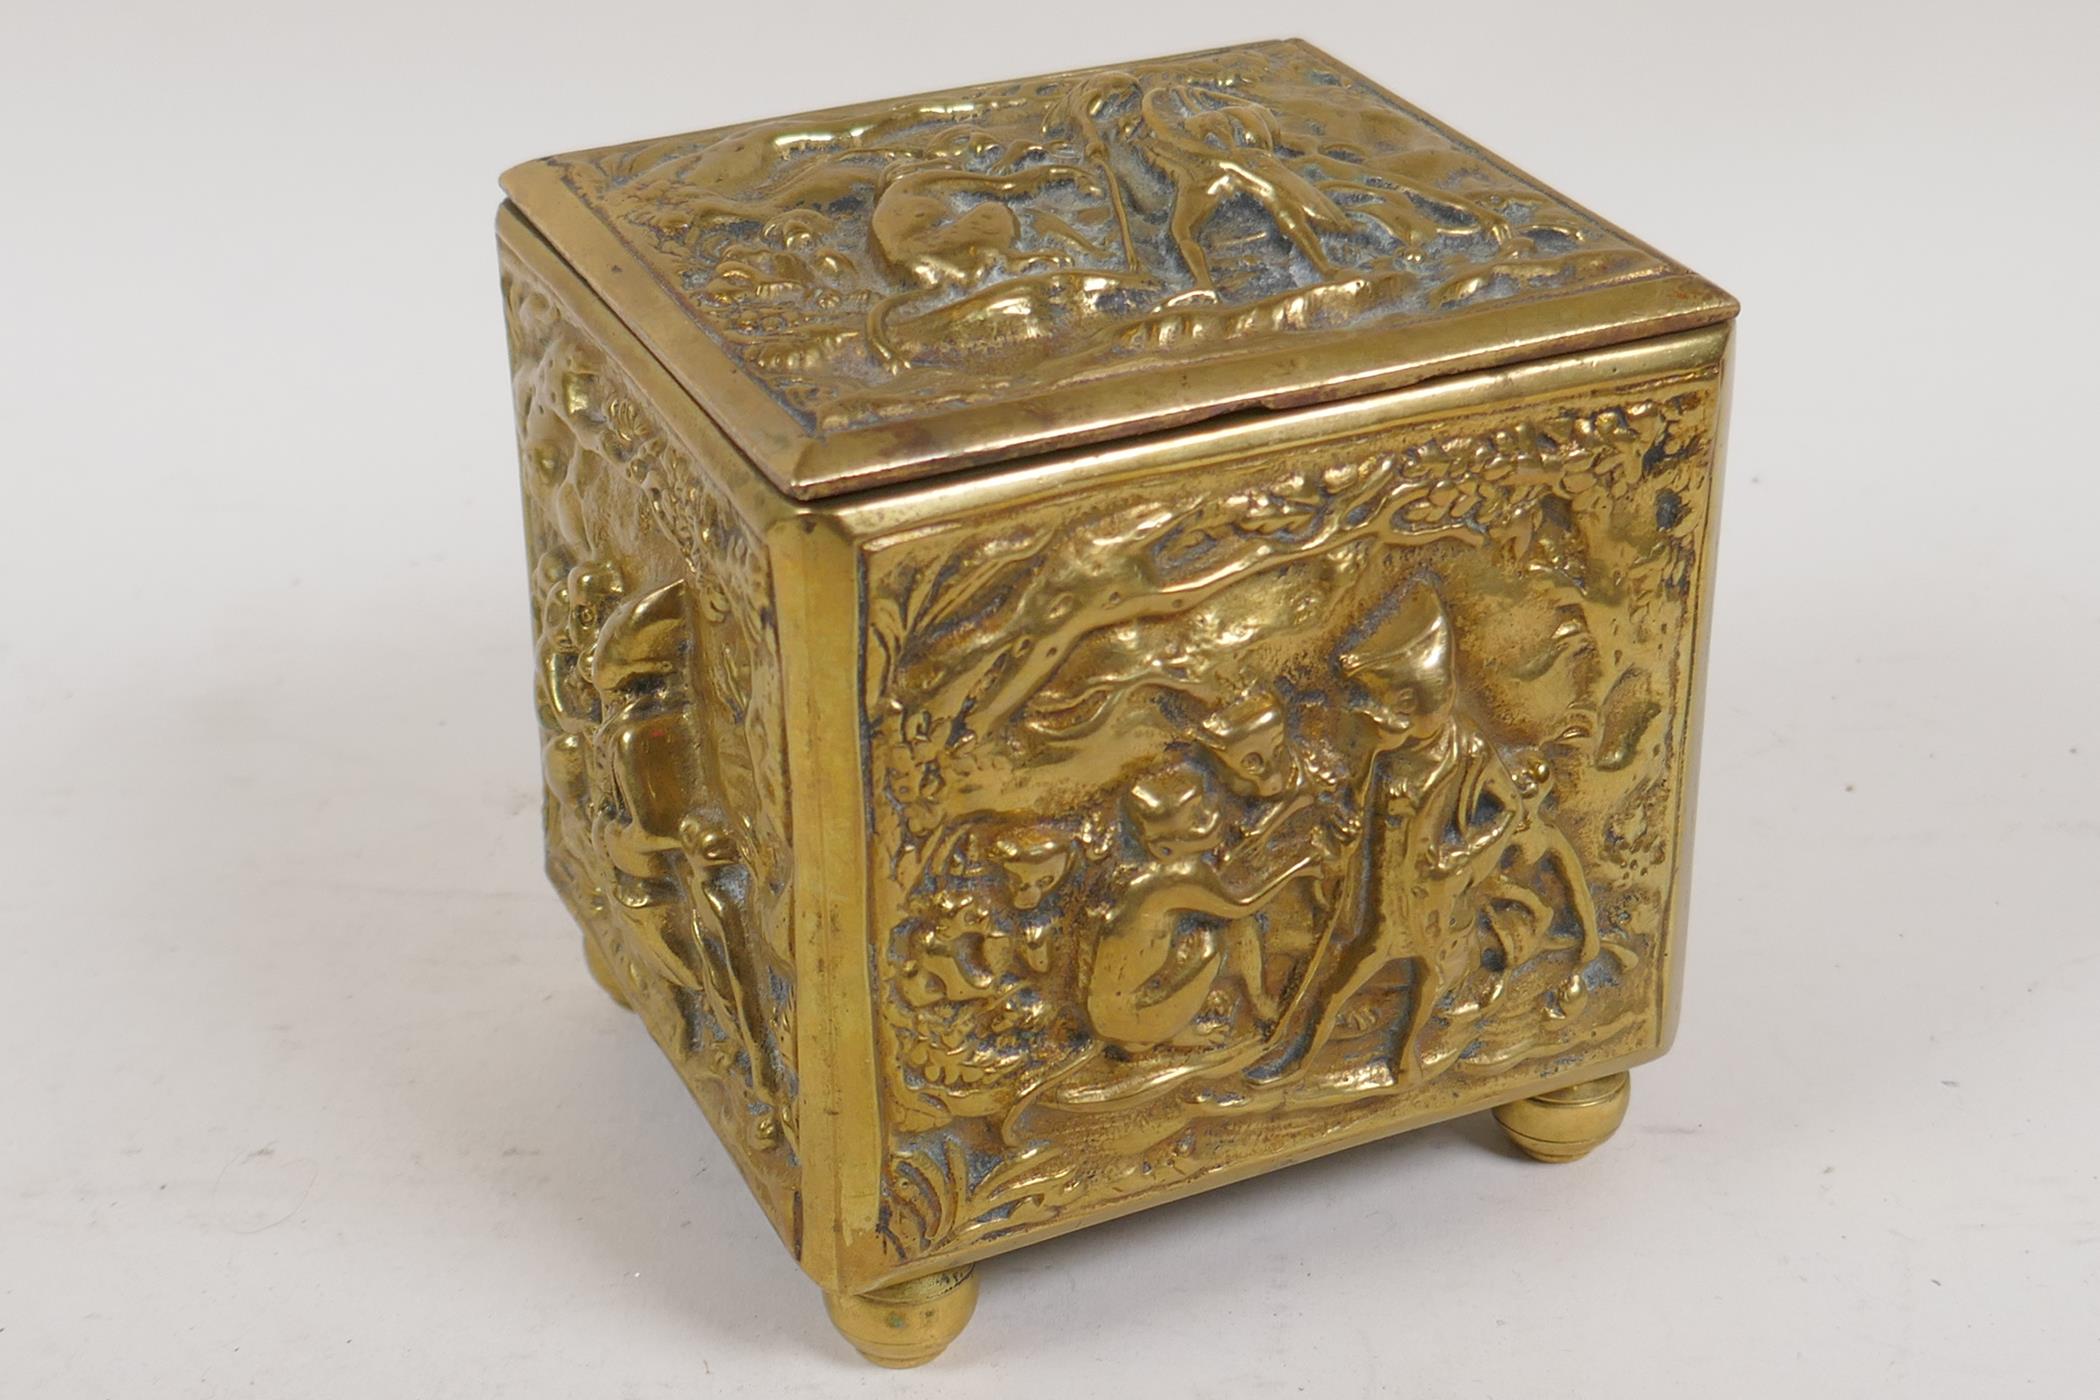 A late C18th/early C19th Dutch brass tobacco box embossed with a scene of a travelling monkey